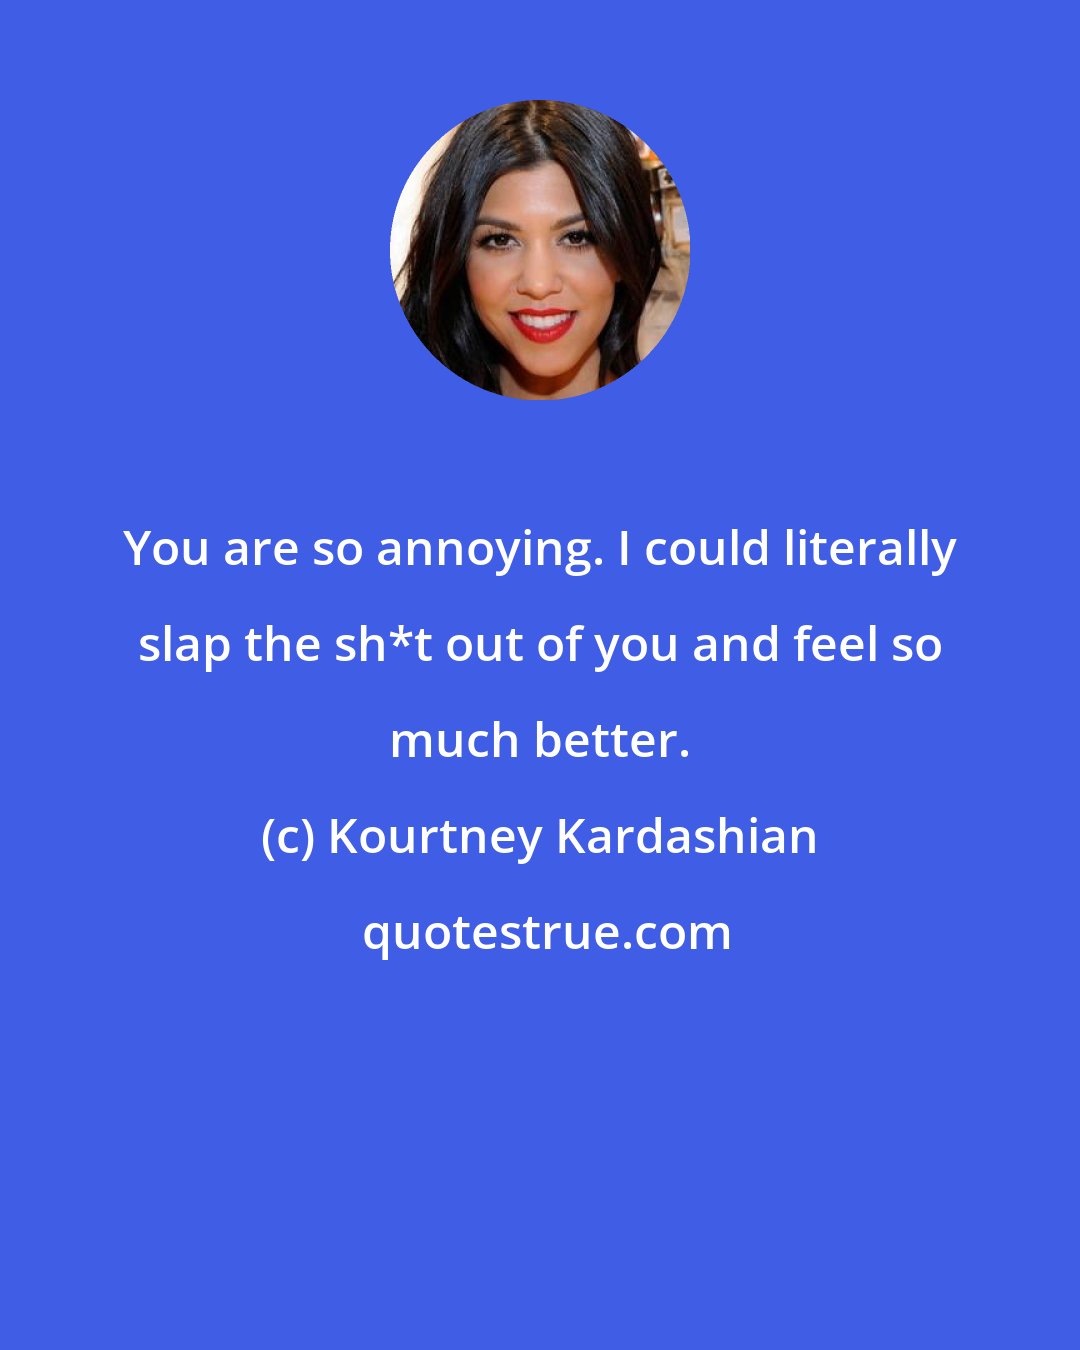 Kourtney Kardashian: You are so annoying. I could literally slap the sh*t out of you and feel so much better.